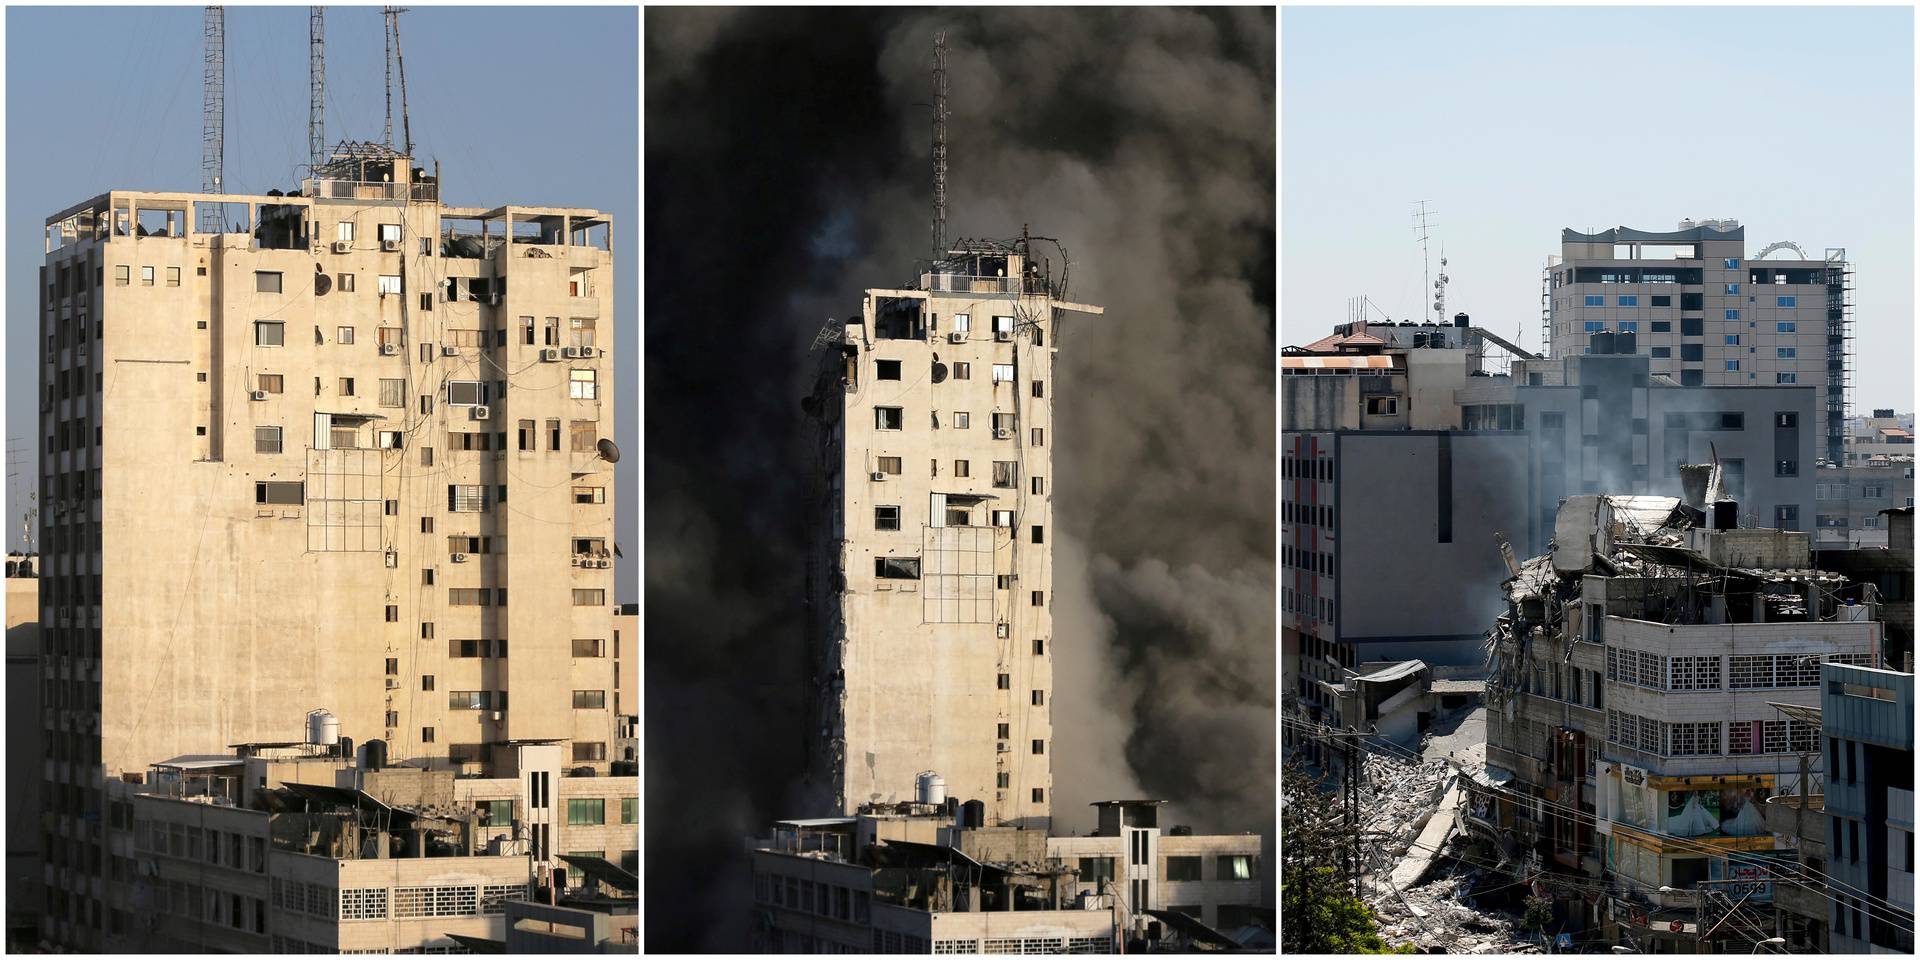 Combination picture shows a tower building before and after it was destroyed by Israeli air strikes in Gaza